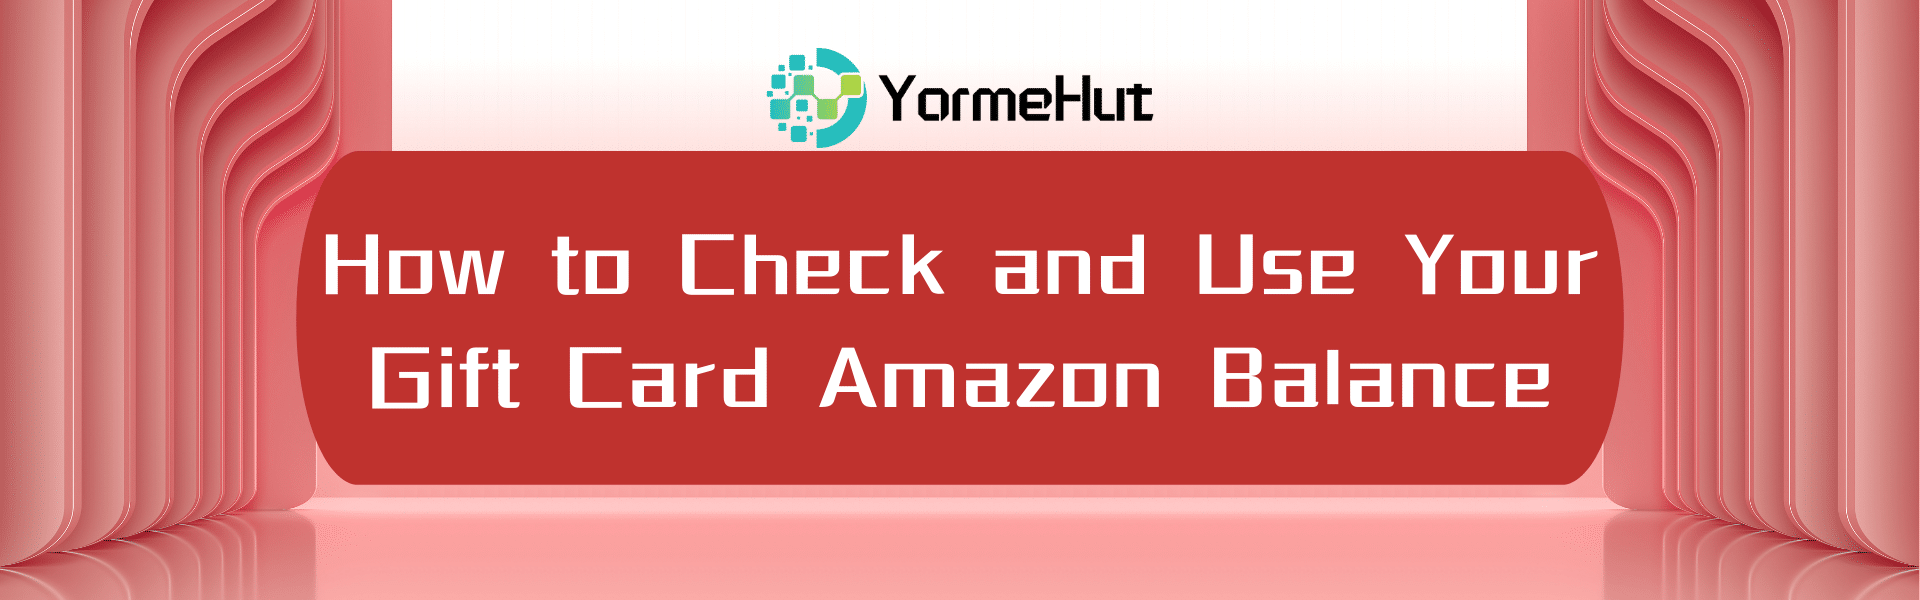 How to Check and Use Your Gift Card Amazon Balance